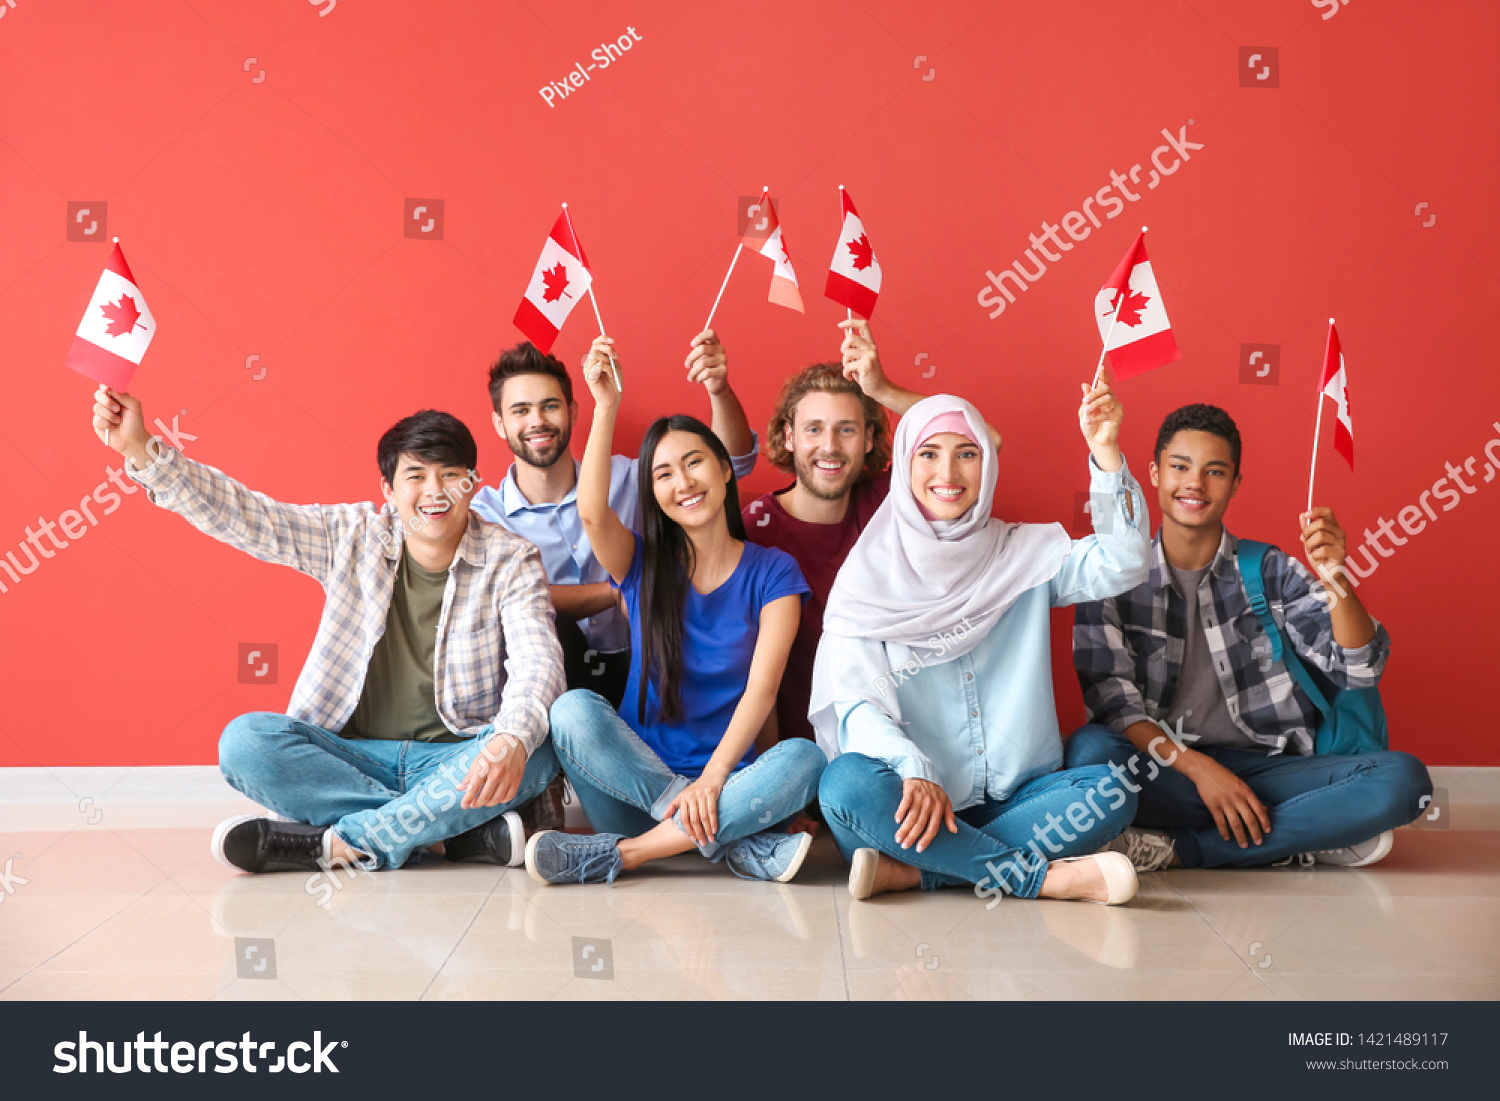 Group of students with Canadian flags sitting near color wall #1421489117